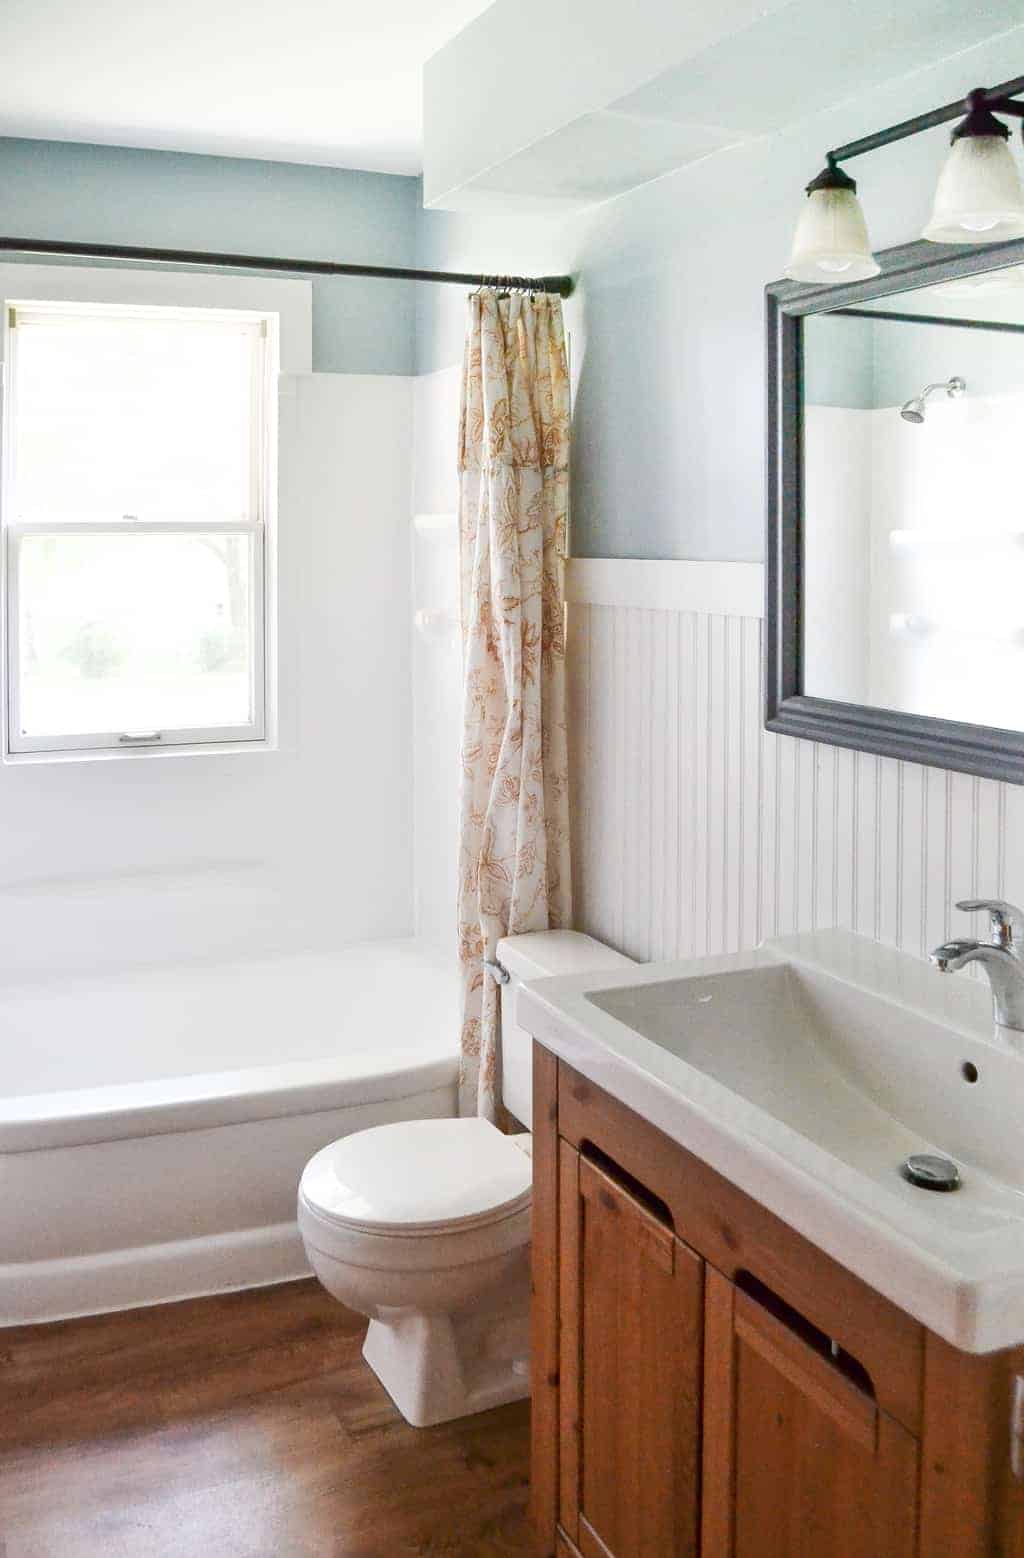 How To Paint A Bathtub - Looking for an inexpensive way to change the bathtub in your home? Paint it! It is easy and inexpensive and looks amazing!